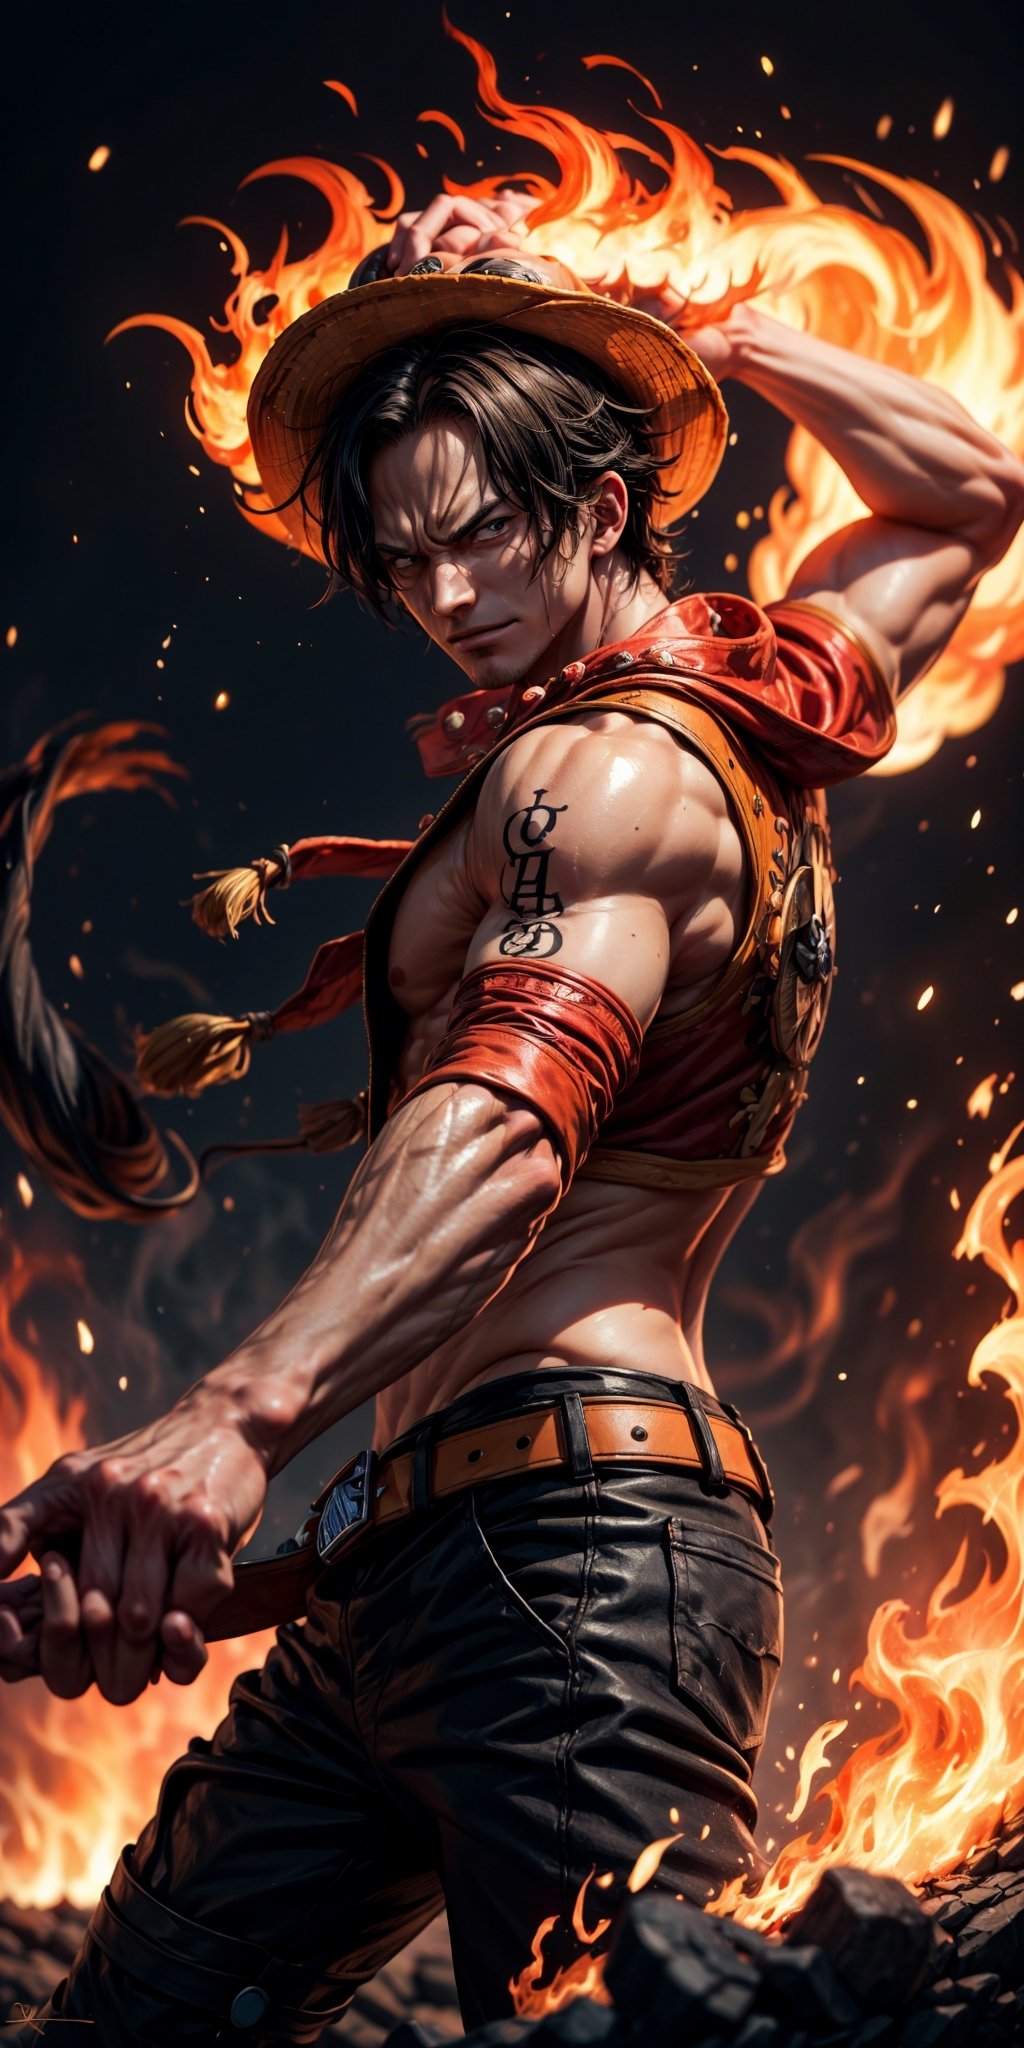 Create the iconic One Piece character, Portgas D. Ace:

"Visualize the legendary Portgas D. Ace, a prominent character from the One Piece anime. He possesses a lithe and muscular physique, reflecting his formidable strength.

Ace is clad in his signature attire, wearing a stylish hat that adds to his iconic appearance. His defining ability is his mastery over fire, and his hands should be ablaze with flickering flames, showcasing his power to manipulate fire at will.

Set him against a background of raging fire, with flames dancing in the backdrop, creating an inferno-like atmosphere. The flames should emphasize his fiery abilities and his unwavering resolve.

Capture this image to pay homage to Portgas D. Ace's character, showcasing his powerful presence and his association with the element of fire, a central theme in his story arc within the One Piece series." ((Perfect face)), ((perfect hands)), ((perfect body)), [perfect image of Portgas D. Ace(one piece anime character)],perfecteyes